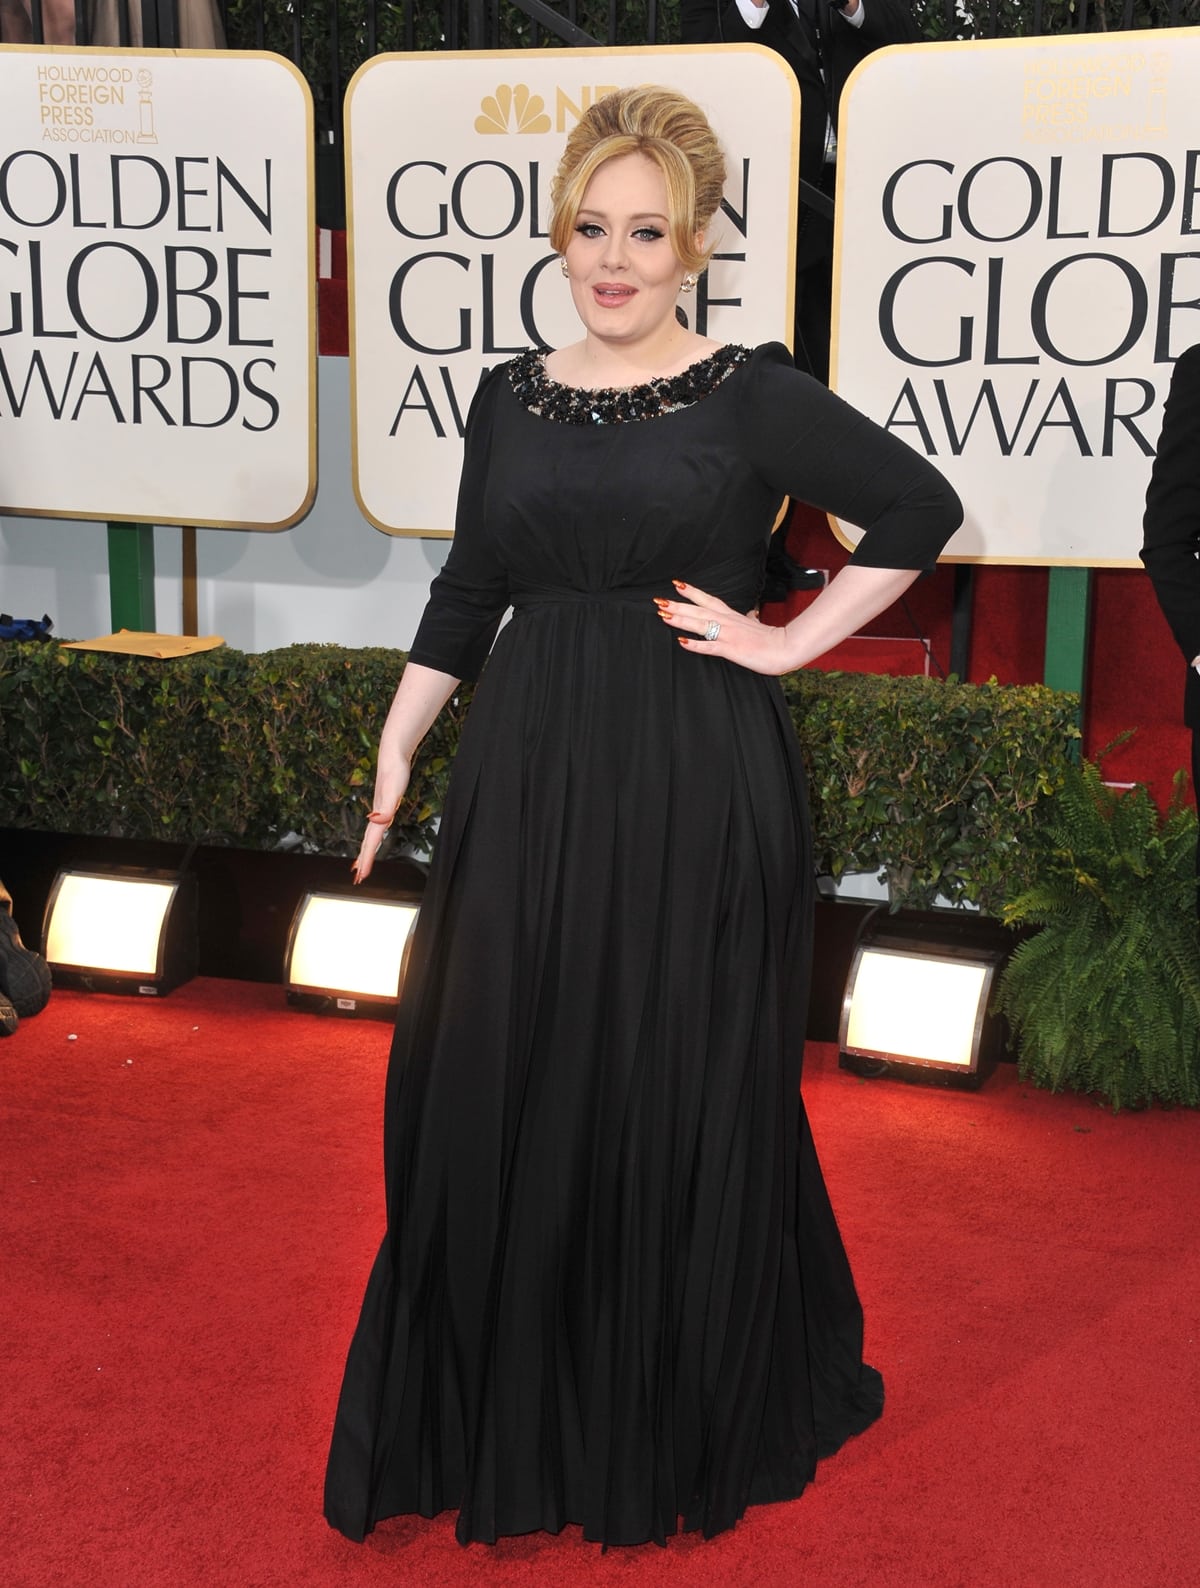 Singer Adele in a black Burberry dress with Cartier jewelry at the 70th Annual Golden Globe Awards